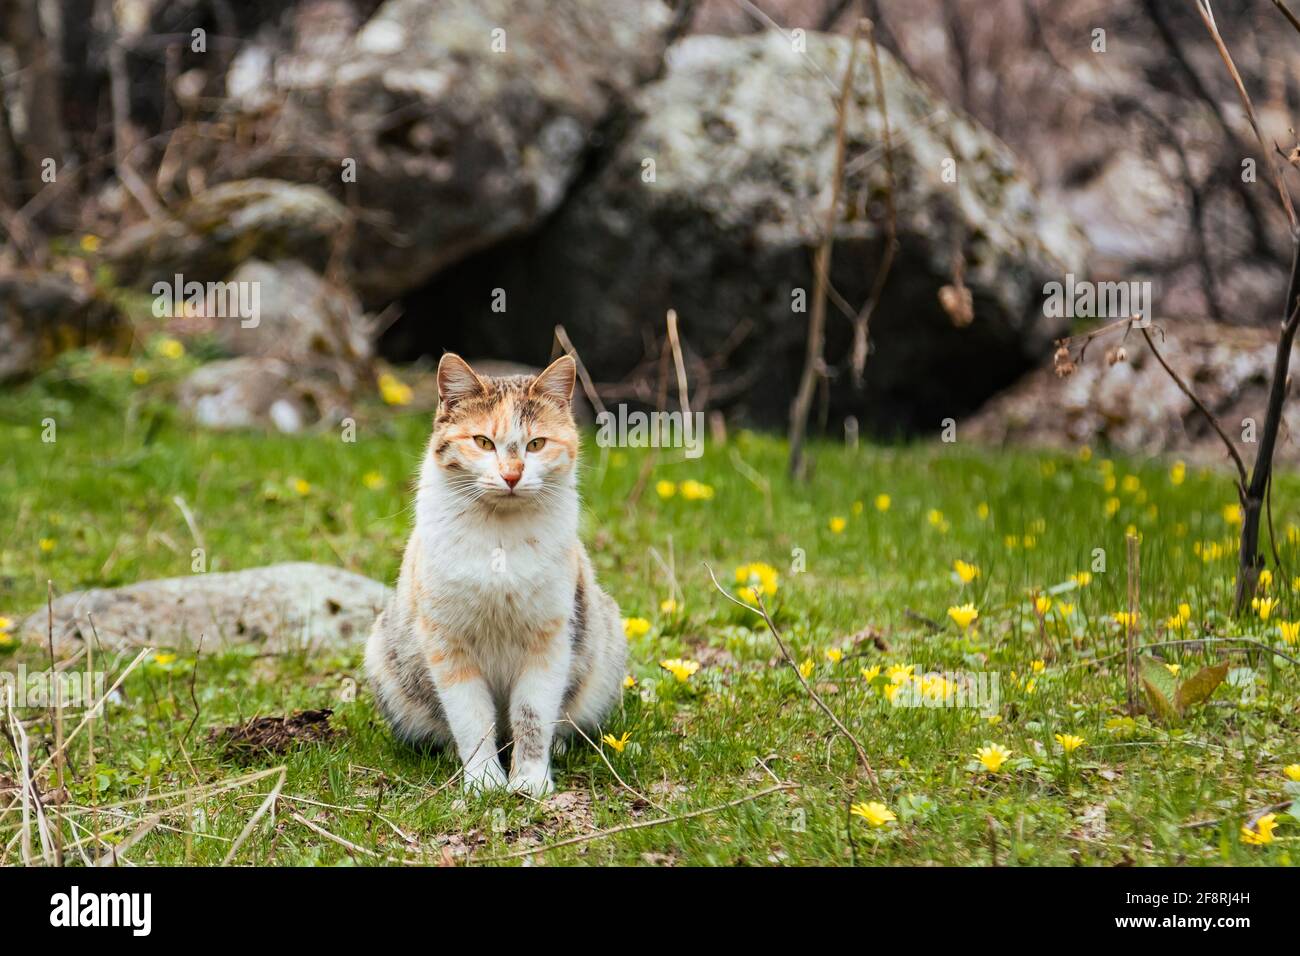 Lovely cat sitting on grass full of tiny yellow flowers in spring next to the stone Stock Photo